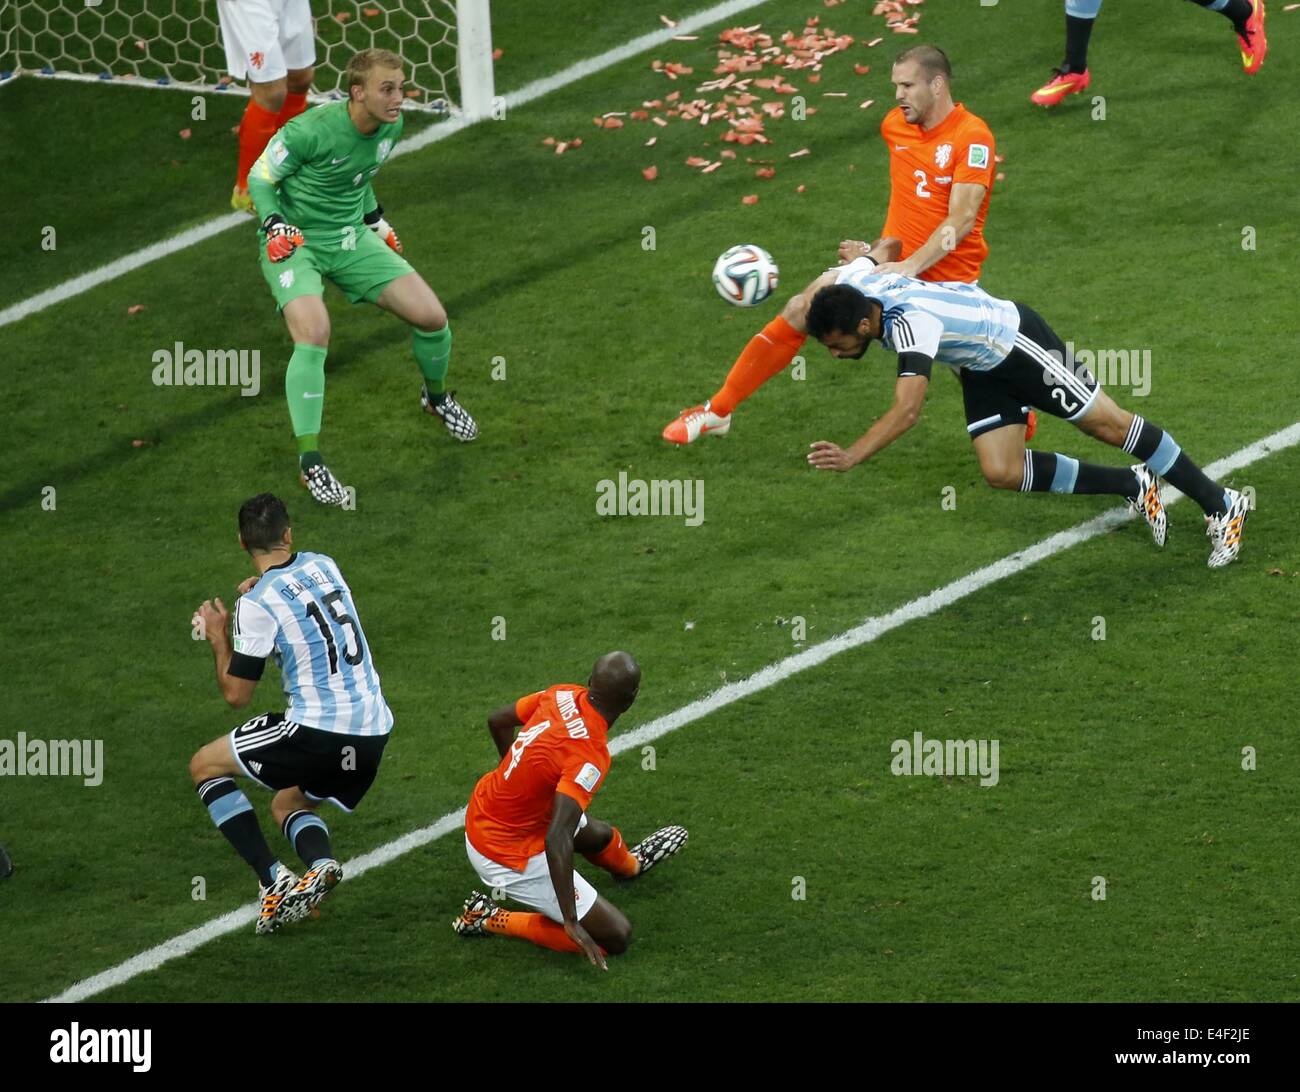 Sao Paulo, Brazil. 9th July, 2014. Argentina's Ezequiel Garay (No.2) shoots a header during a semifinal match between Netherlands and Argentina of 2014 FIFA World Cup at the Arena de Sao Paulo Stadium in Sao Paulo, Brazil, on July 9, 2014. Credit:  Liao Yujie/Xinhua/Alamy Live News Stock Photo